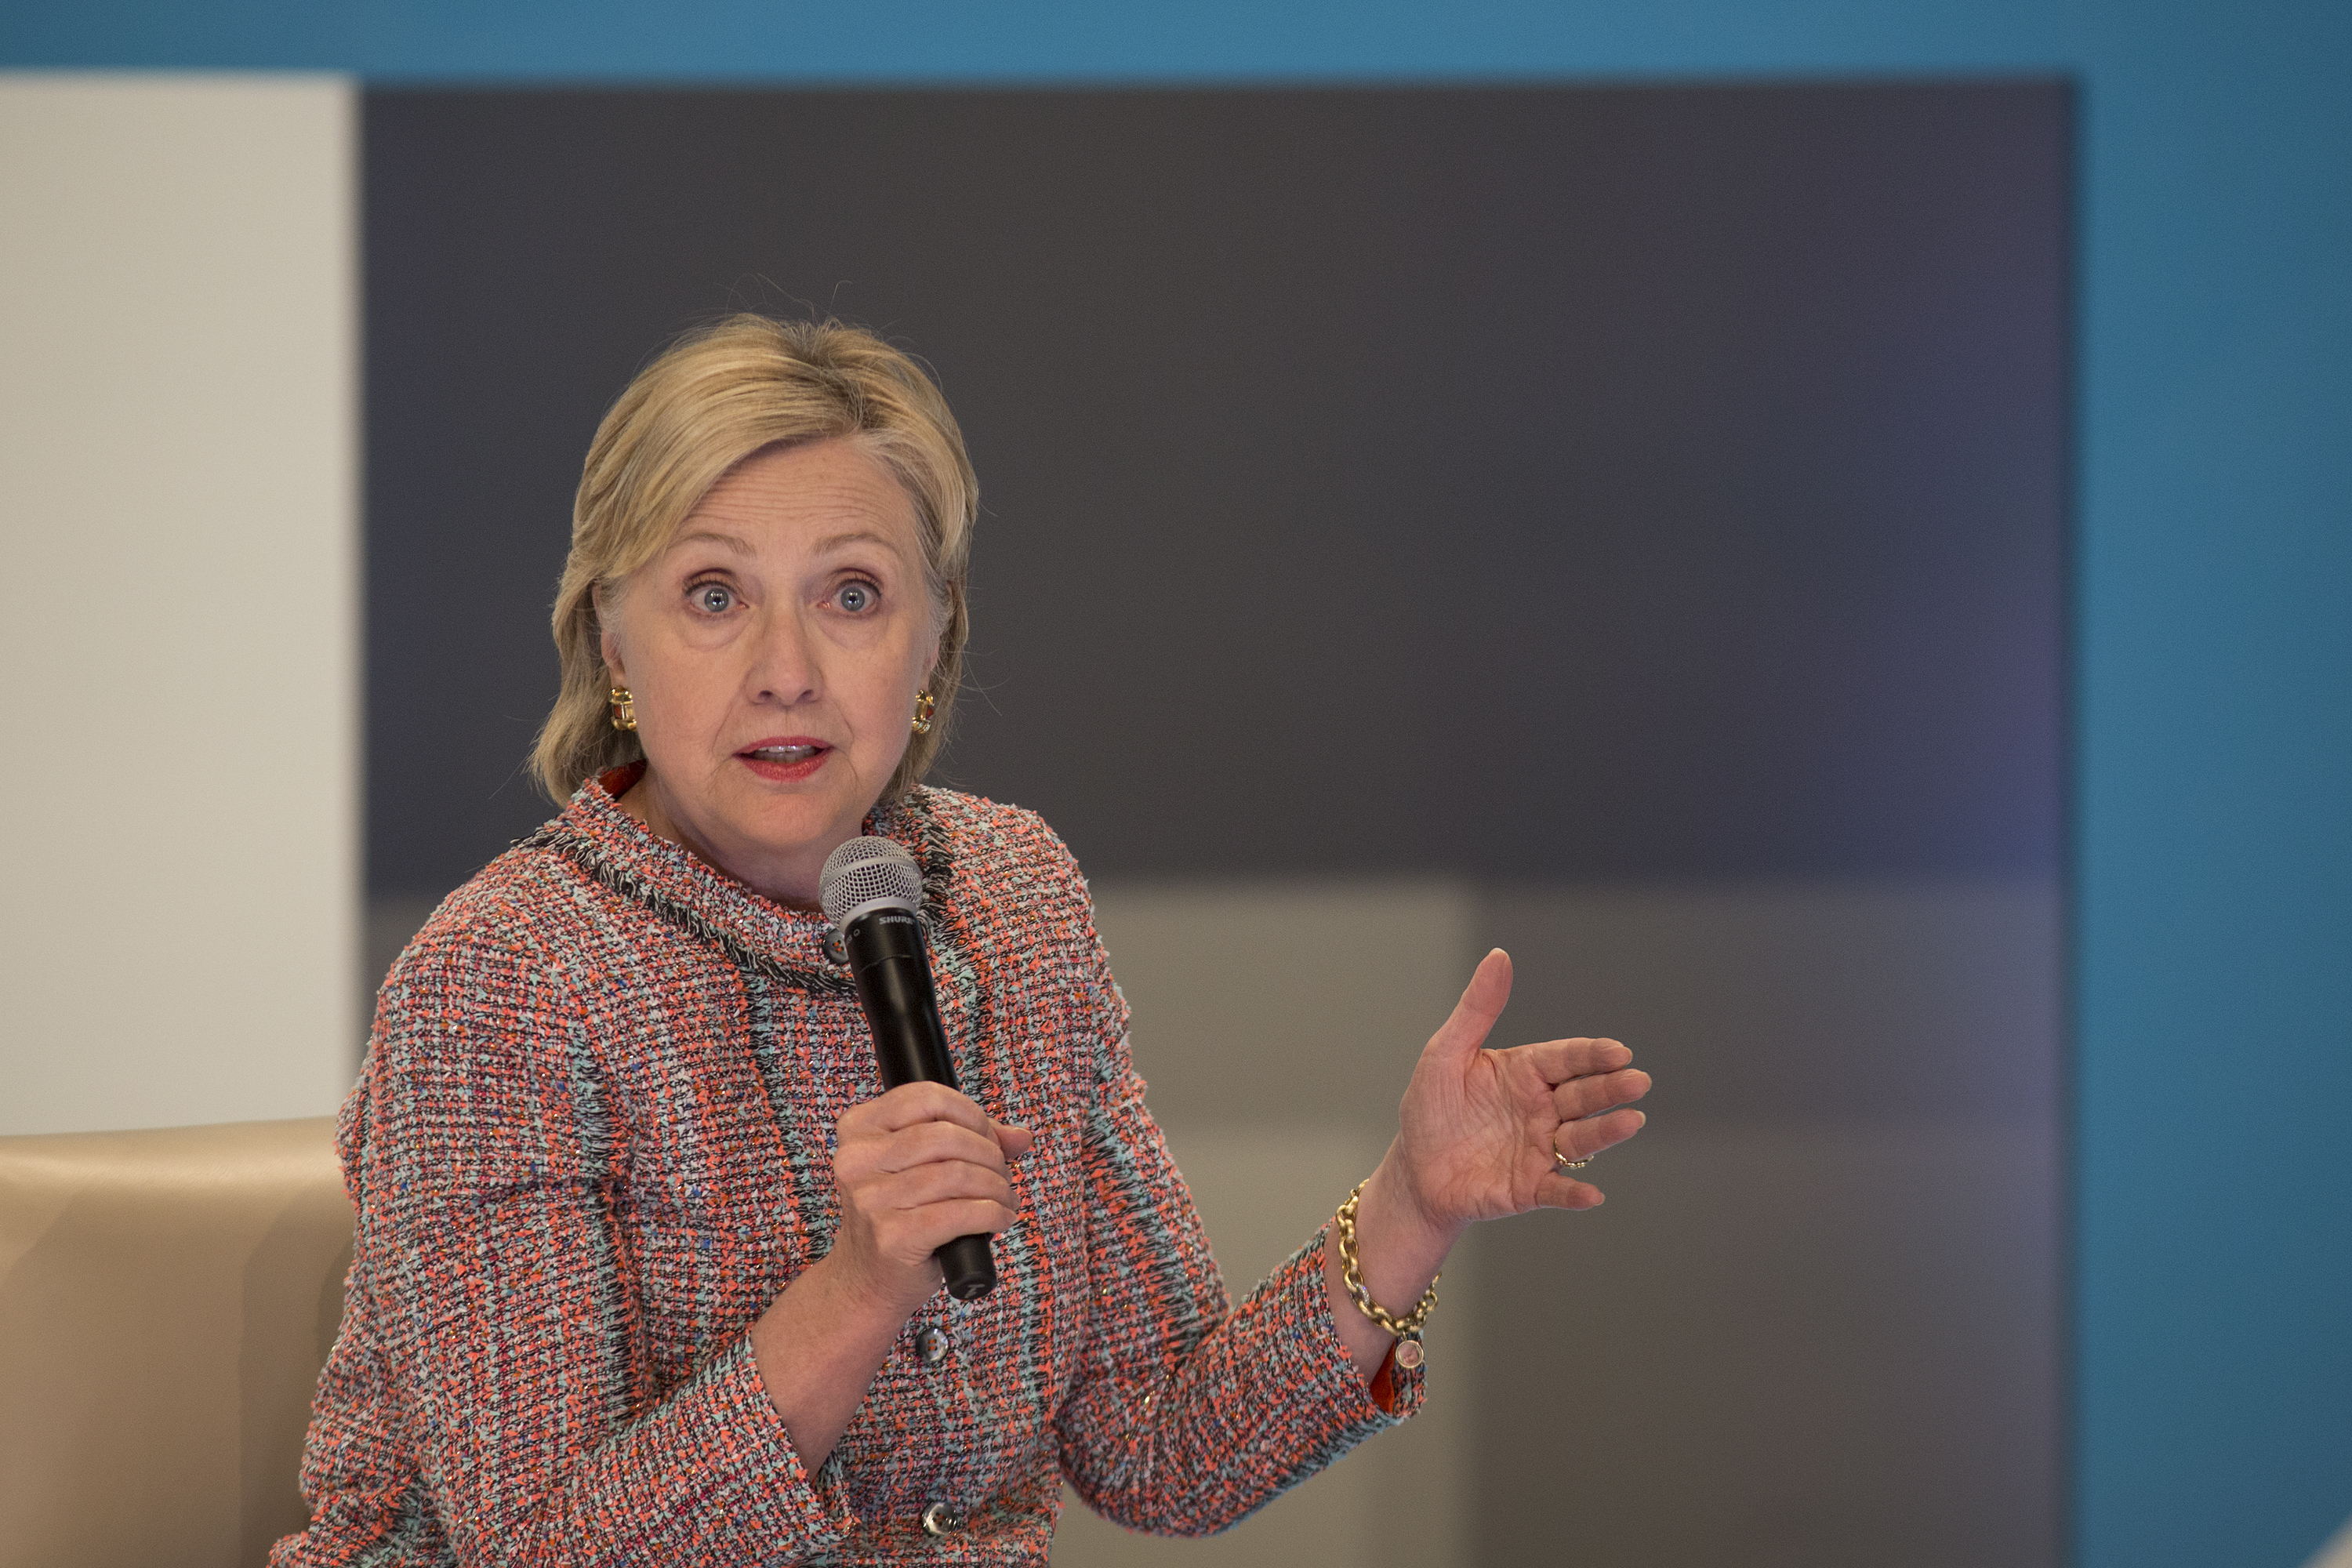 LOS ANGELES, CA - JUNE 28: Democratic presidential candidate Hillary Clinton answers a question from an audience member at a town hall discussion with digital content creators at Neuehouse Hollywood on June 28, 2016 in Los Angeles, California.   David McNew/Getty Images/AFP